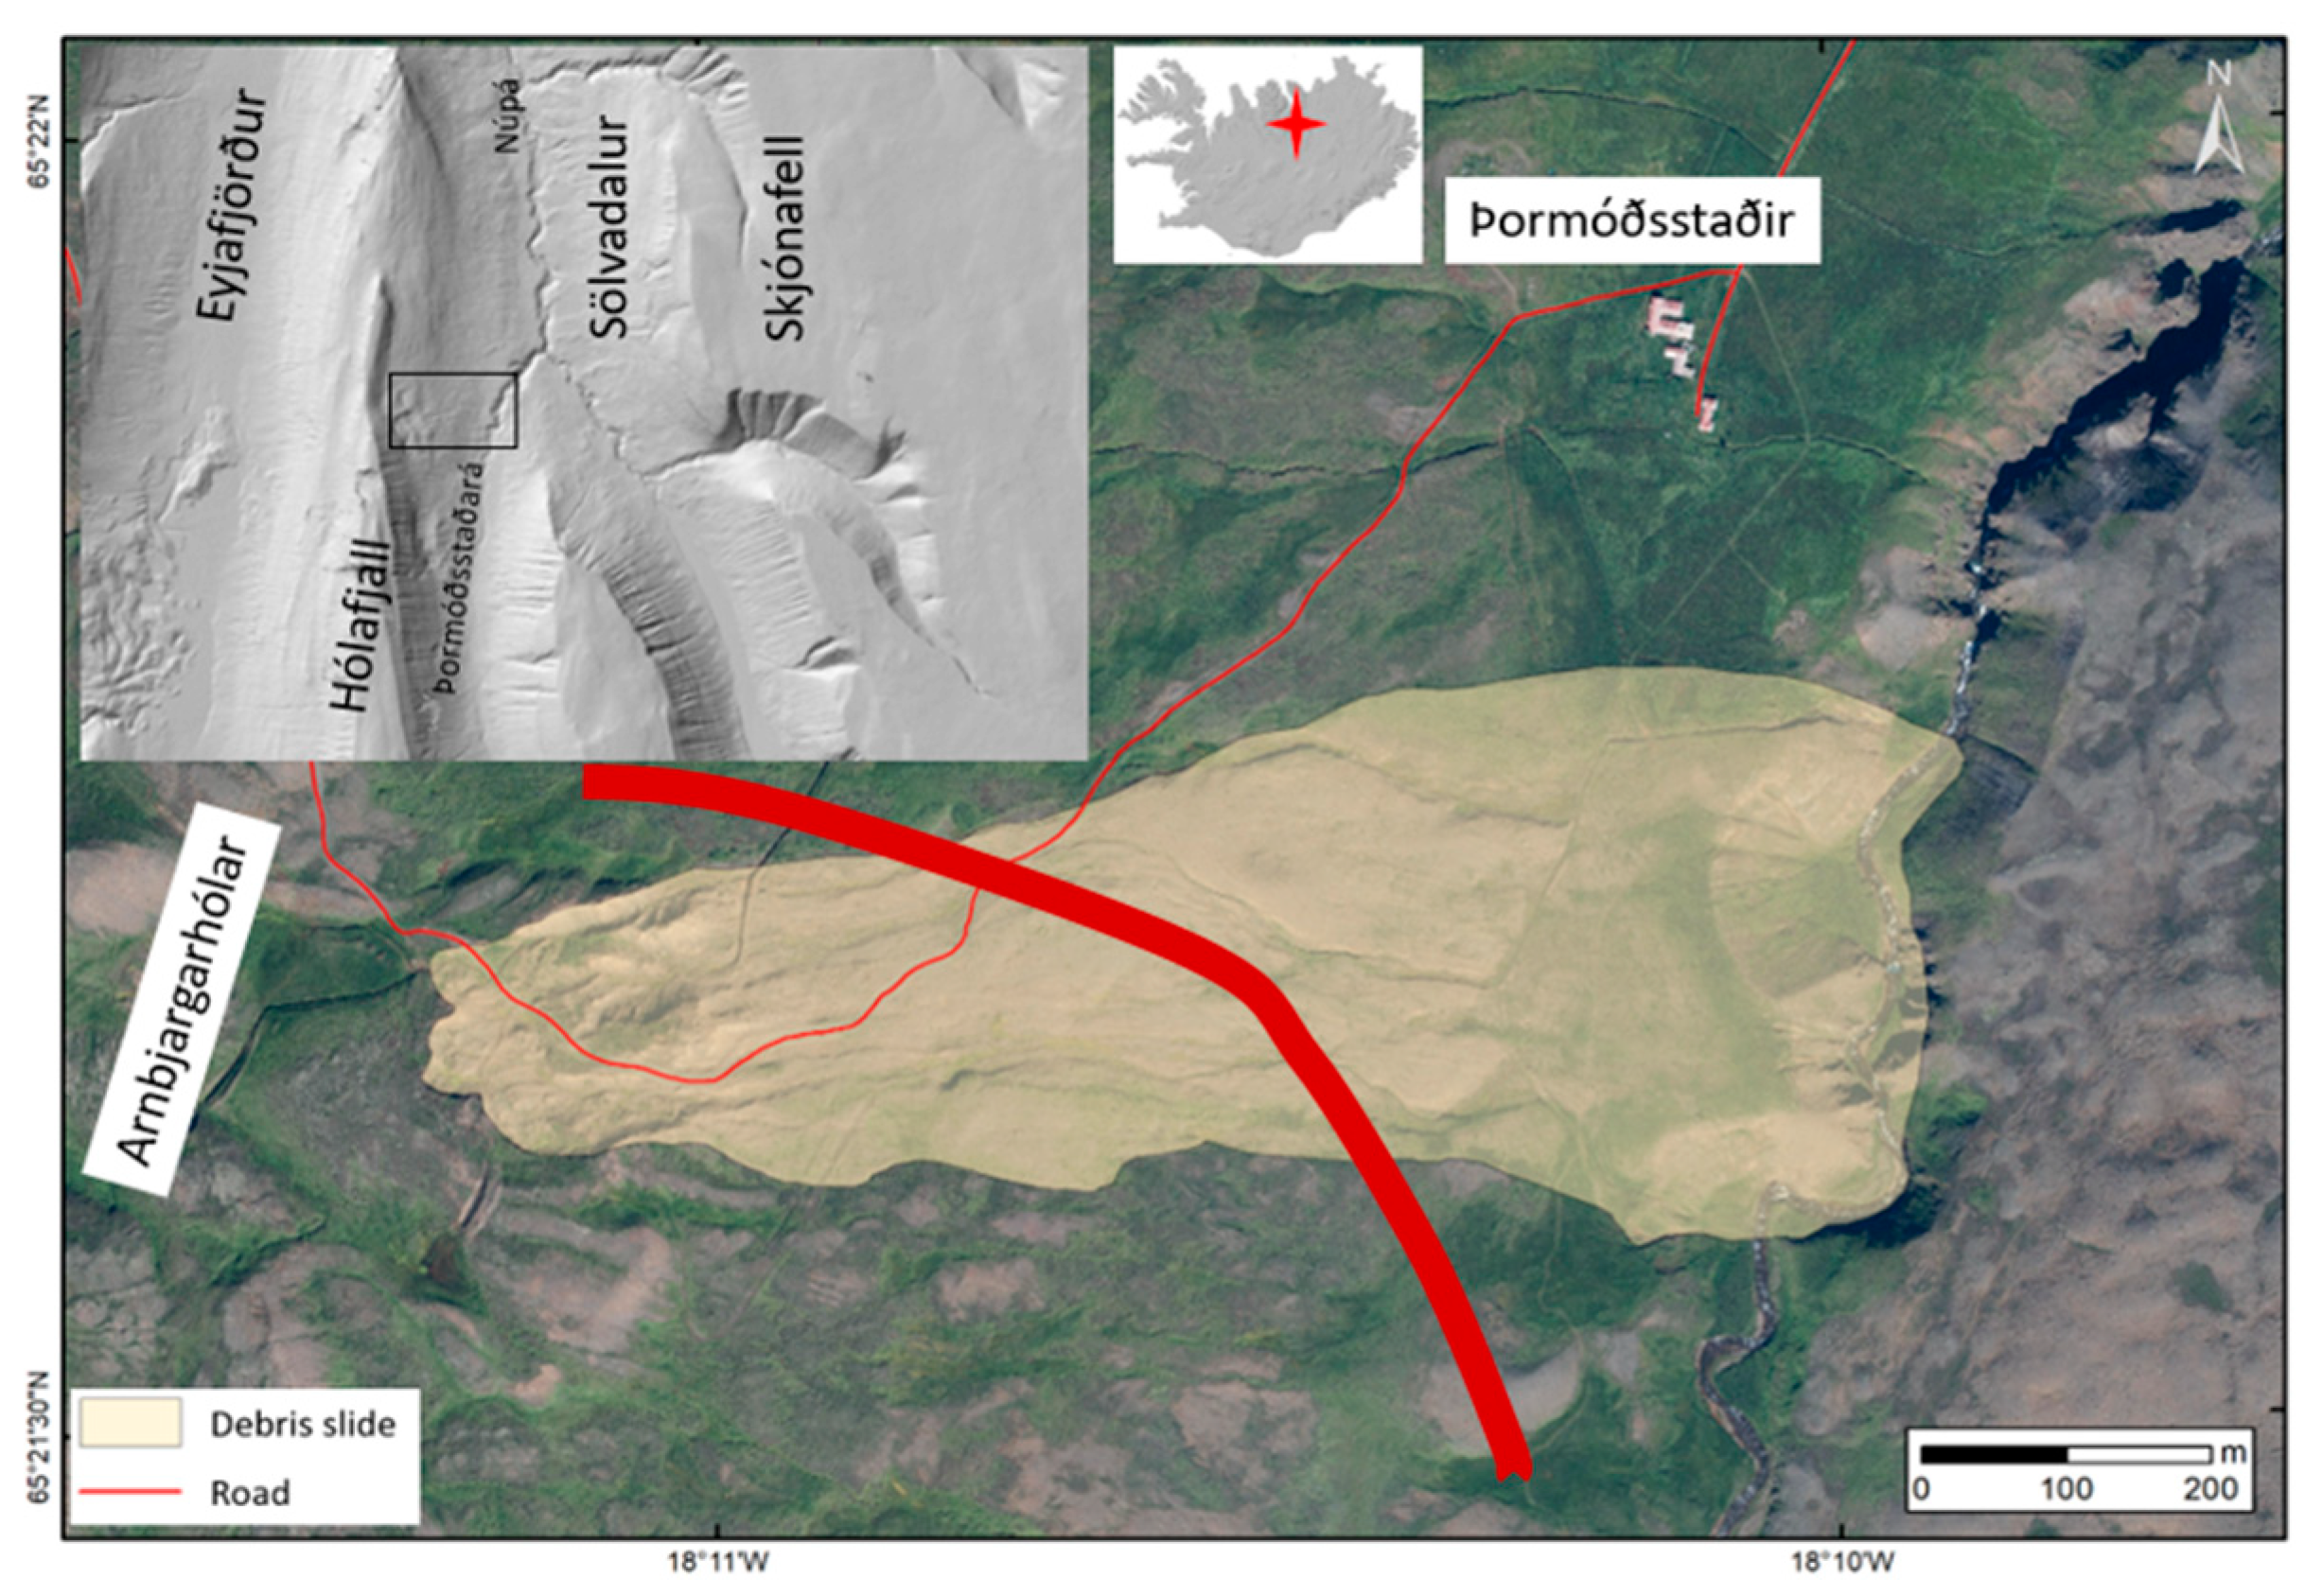 Geosciences Free Full Text Physics And Modeling Of Various Hazardous Landslides Html